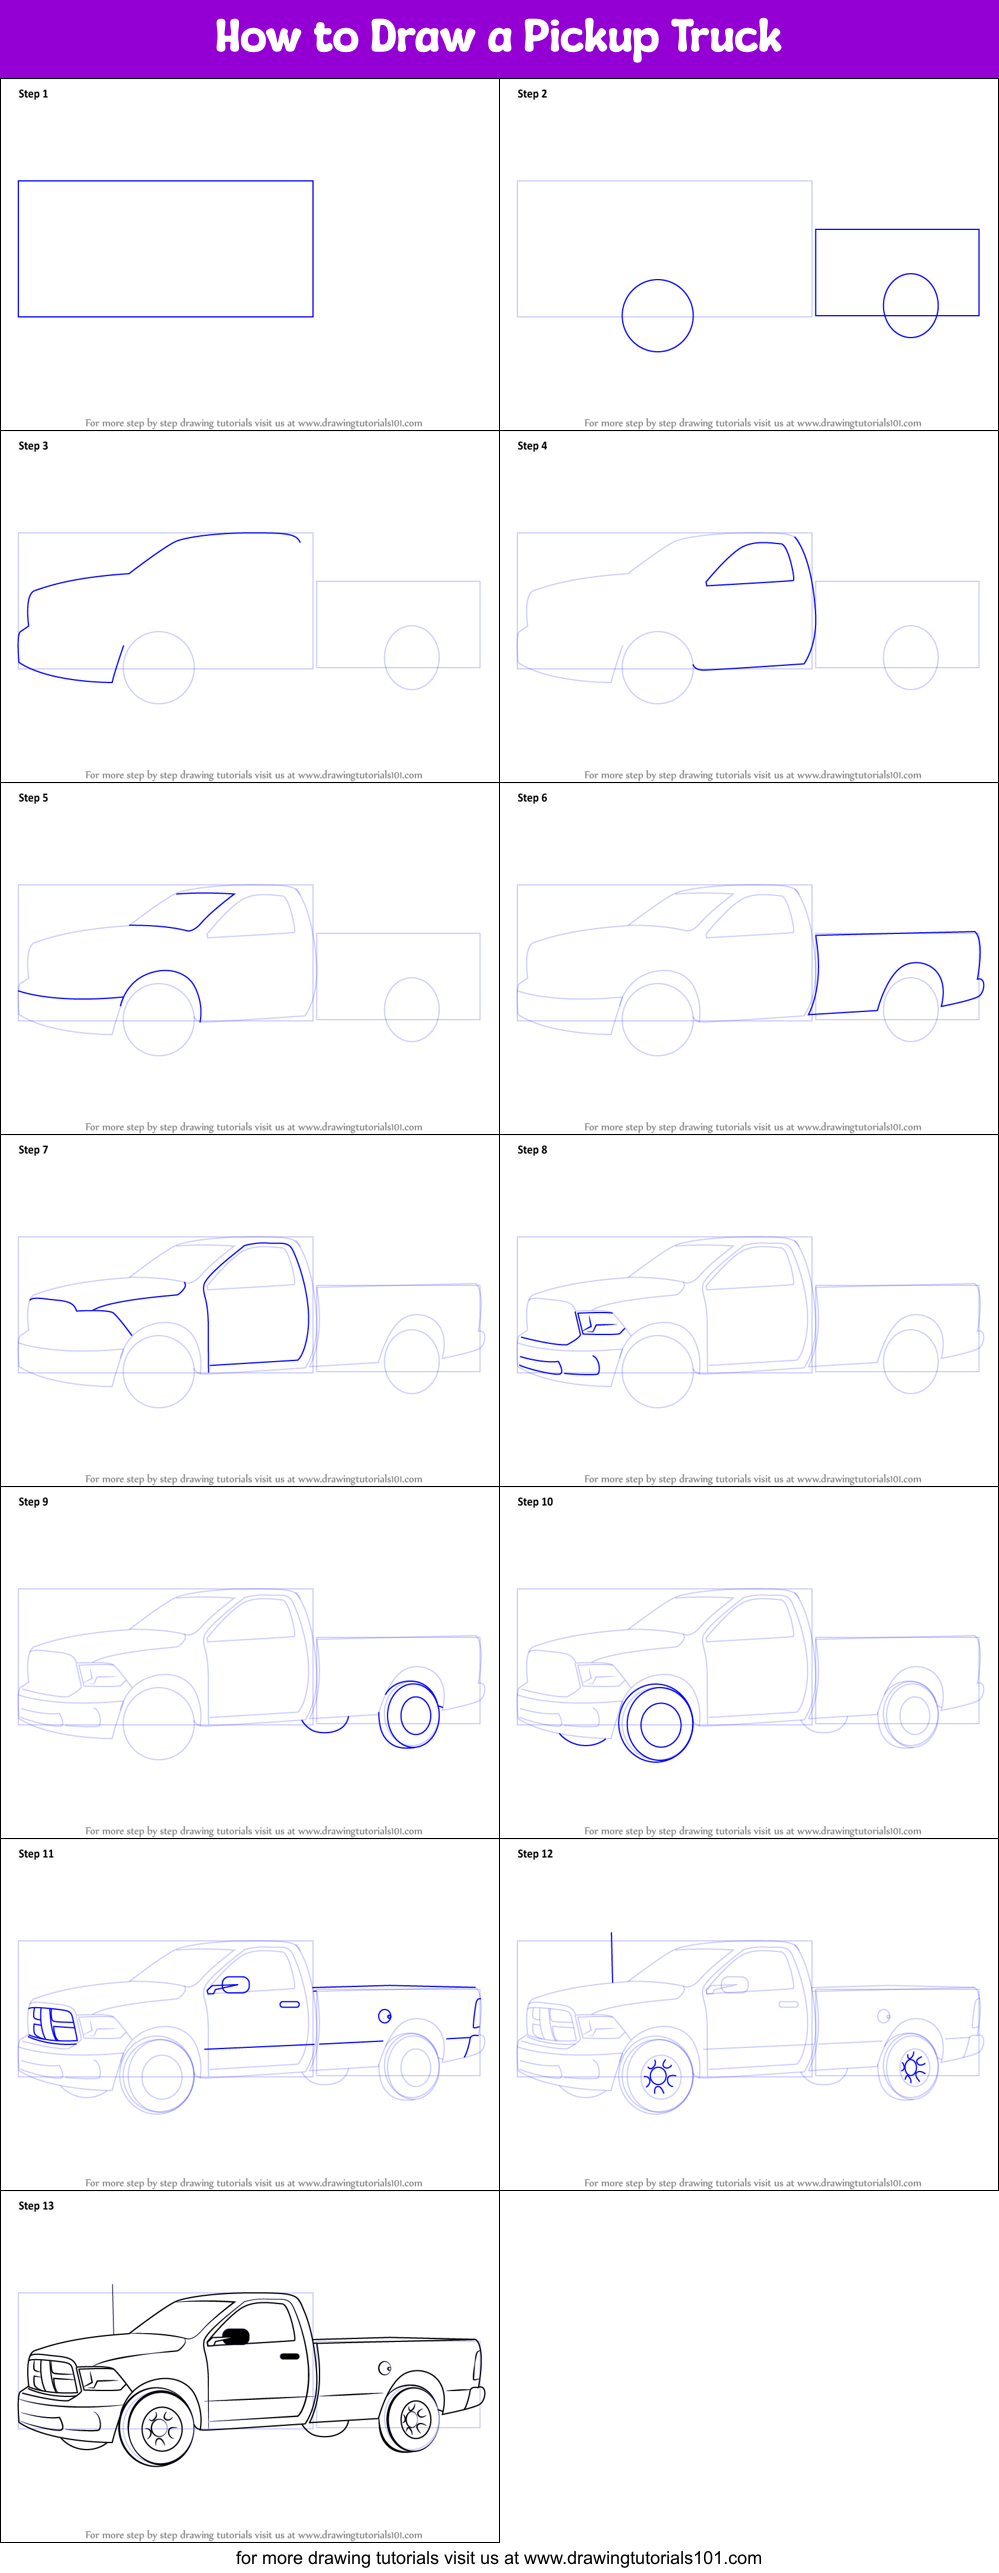 How to Draw a Pickup Truck printable step by step drawing sheet